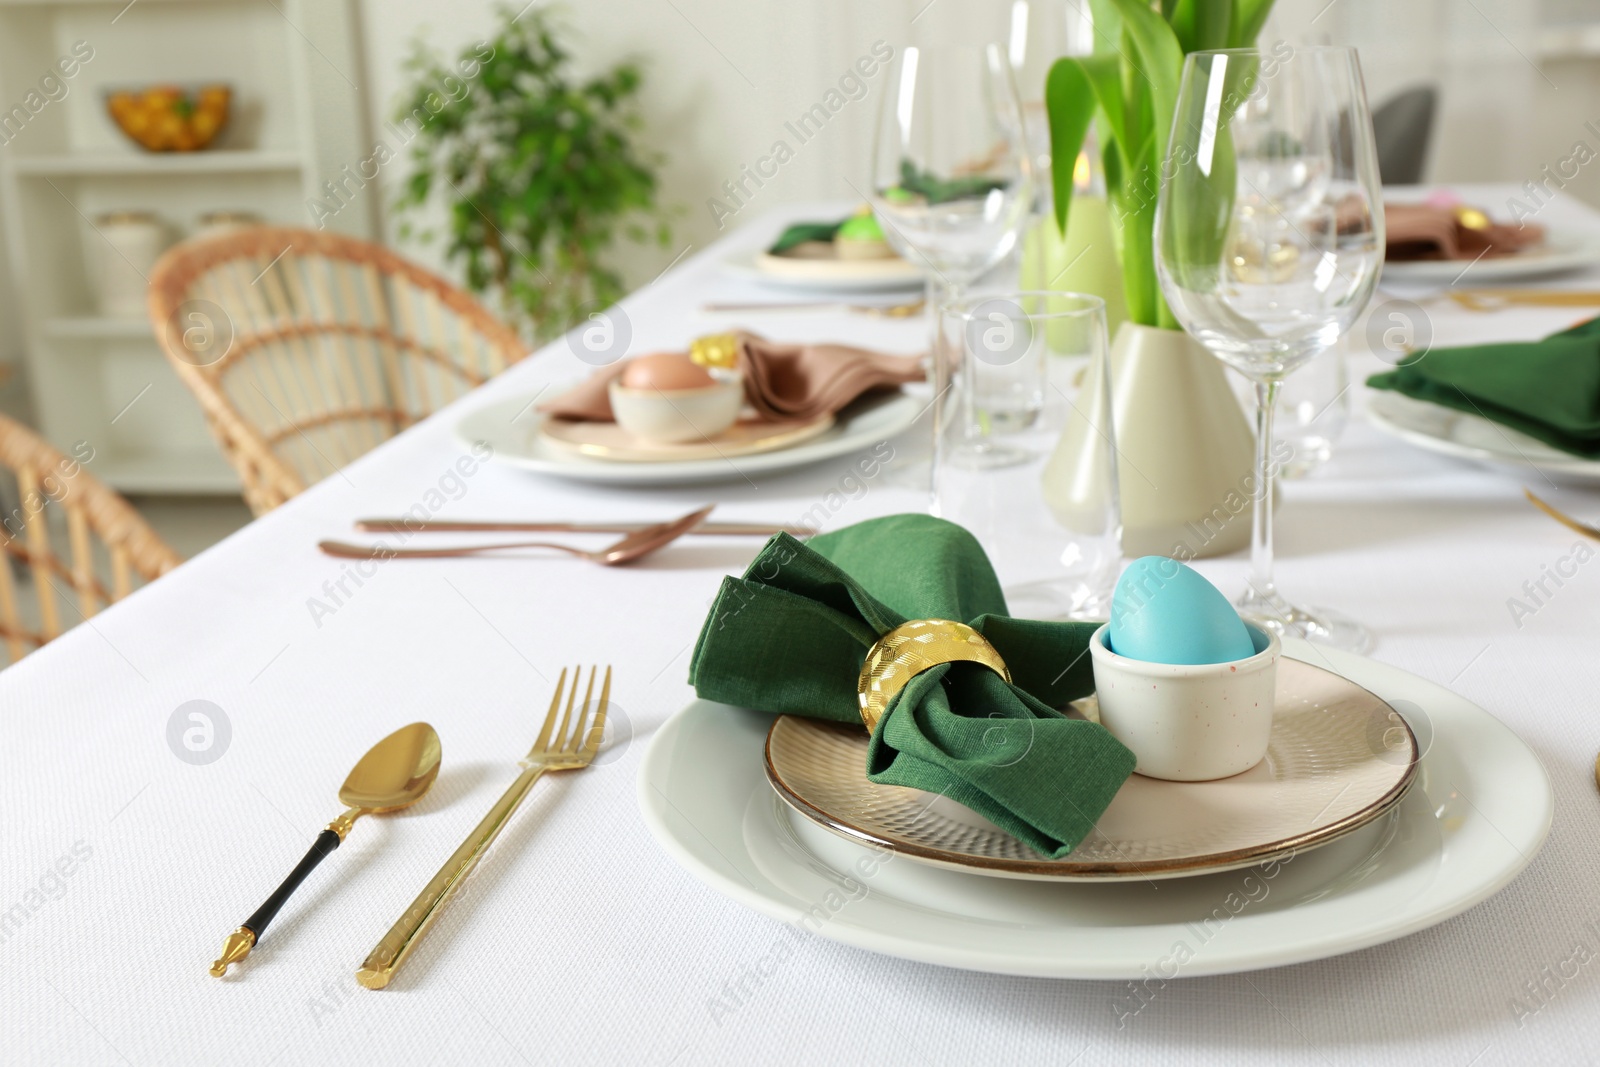 Photo of Festive Easter table setting with painted eggs indoors